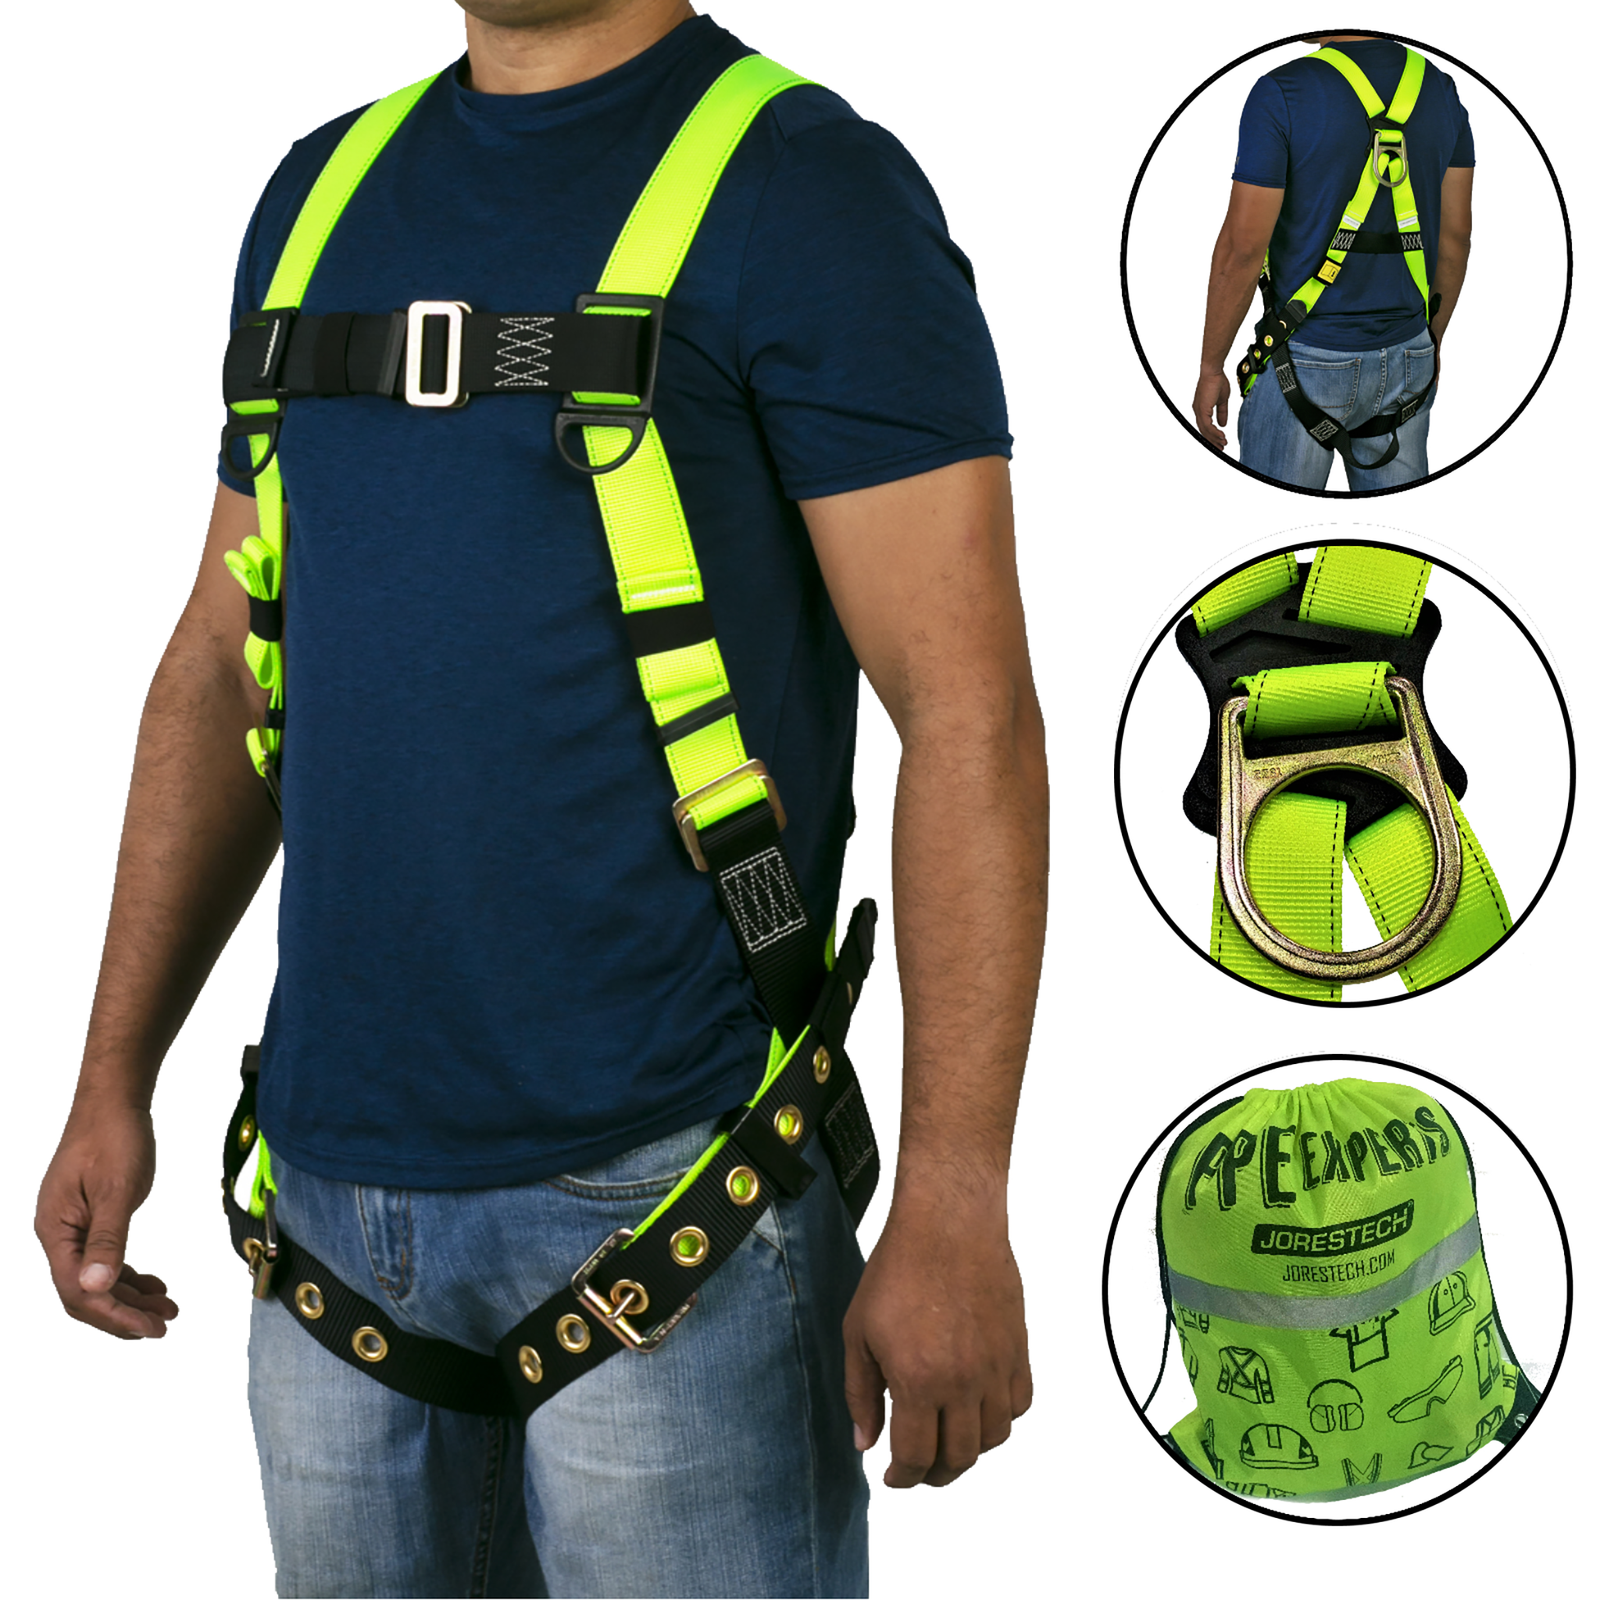 The torso of a person wearing the hi-vis yellow and black 1D fall protection safety body JORESTECH harness with grommets. Also shows the back view of the same person wearing the harness,  a close up of the back ring and a picture of the hi-vis lime carry bag that is included with the harness.